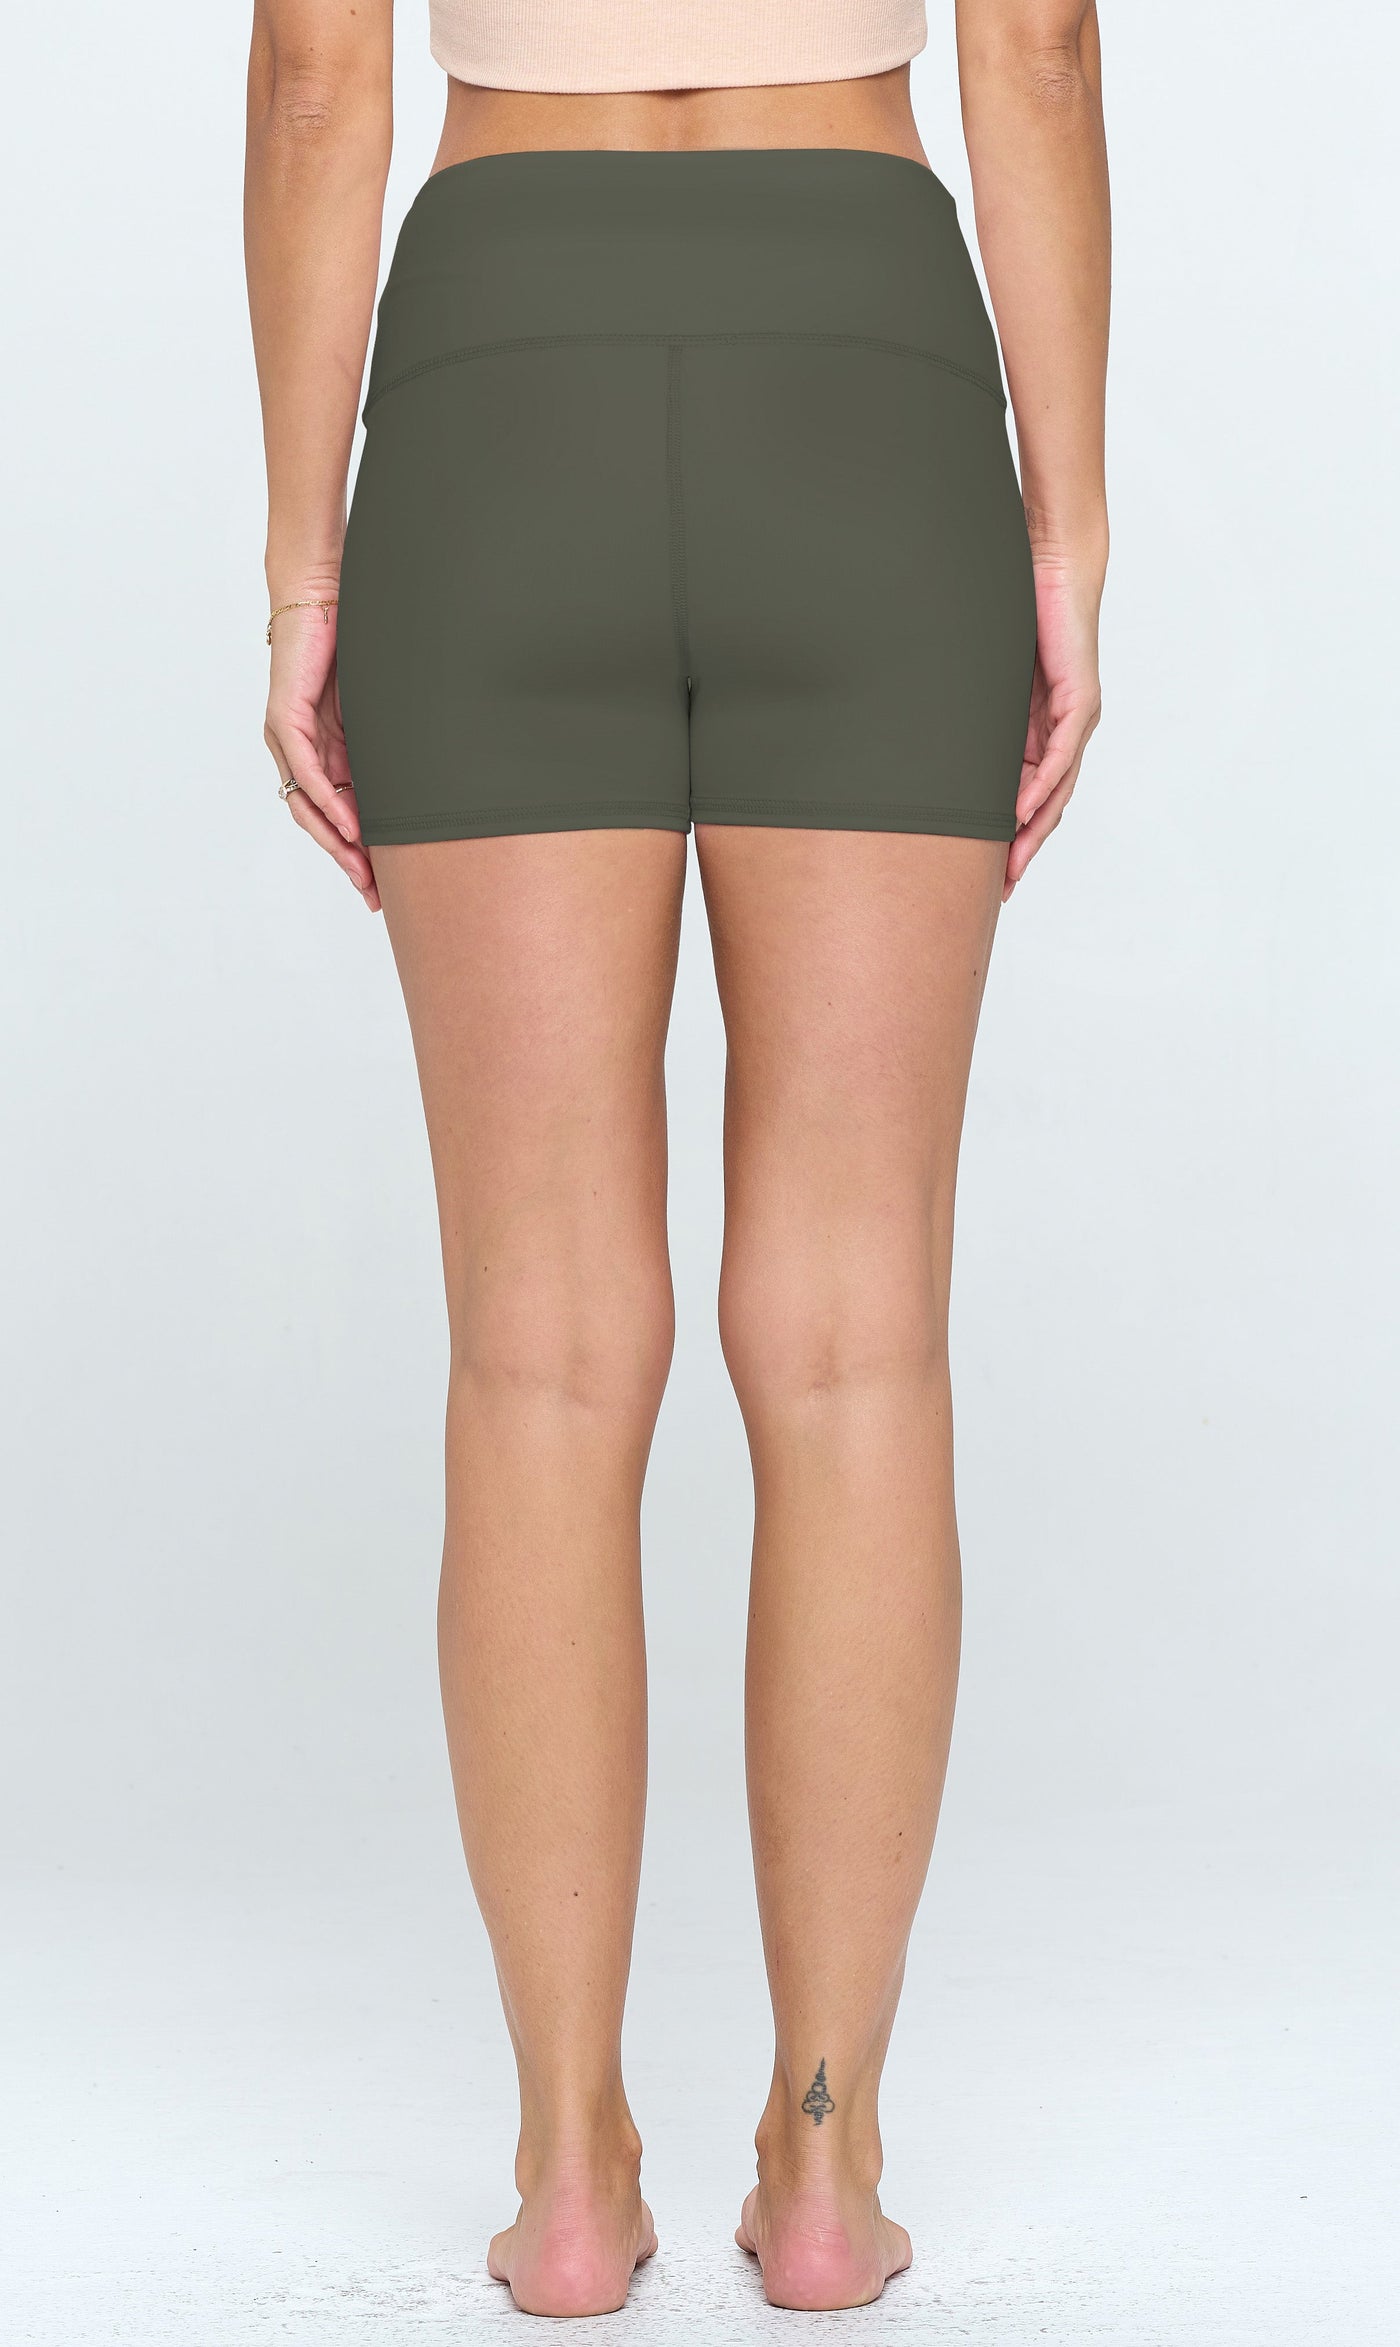 Emma - Agave Green - Booty Shorts 3" (High-Waist) by EVCR